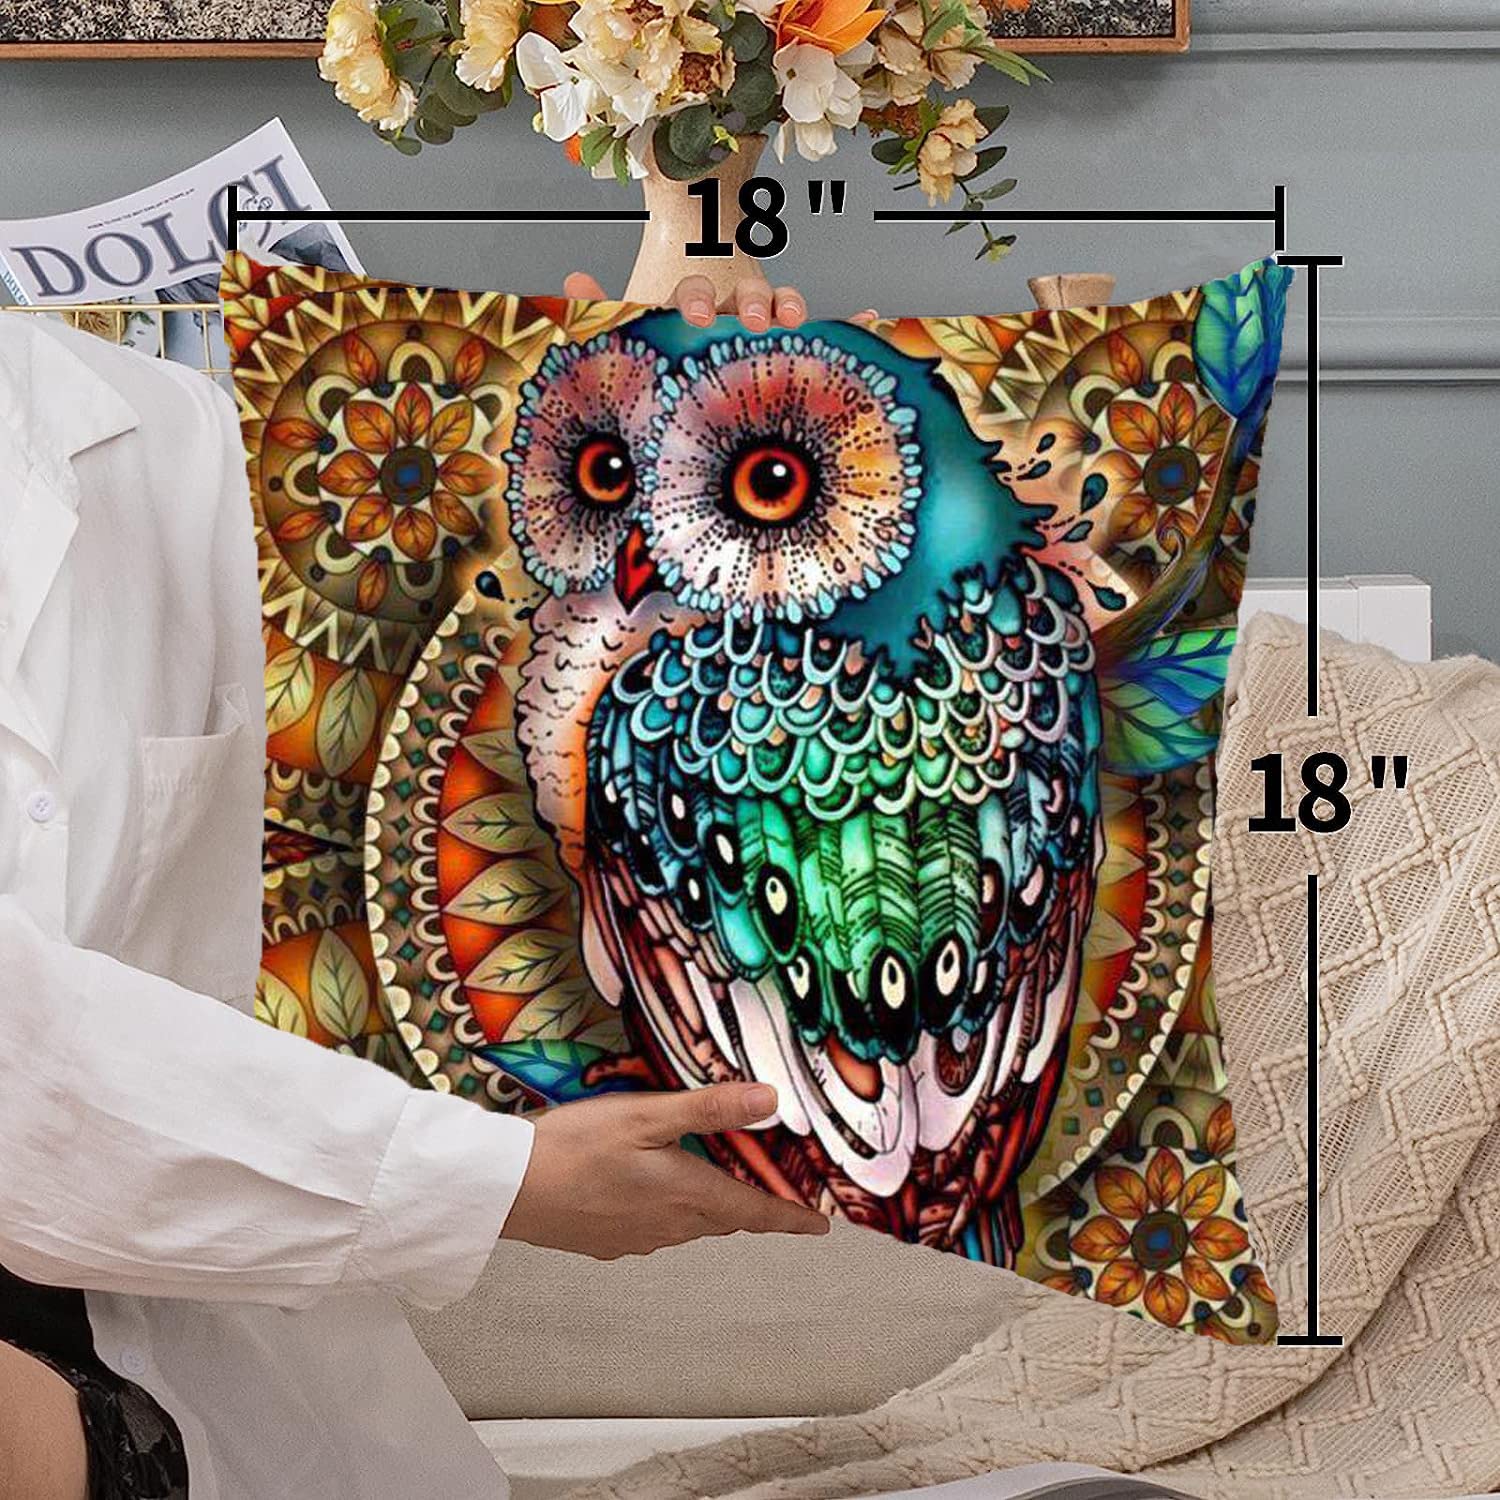 KUNQIAN Owl Cushion Cover Owl Ornament Gifts Throw Pillow Case Decor for Home Livingroom Couch Bed Sofa Decorate 18 inchesx18 inches